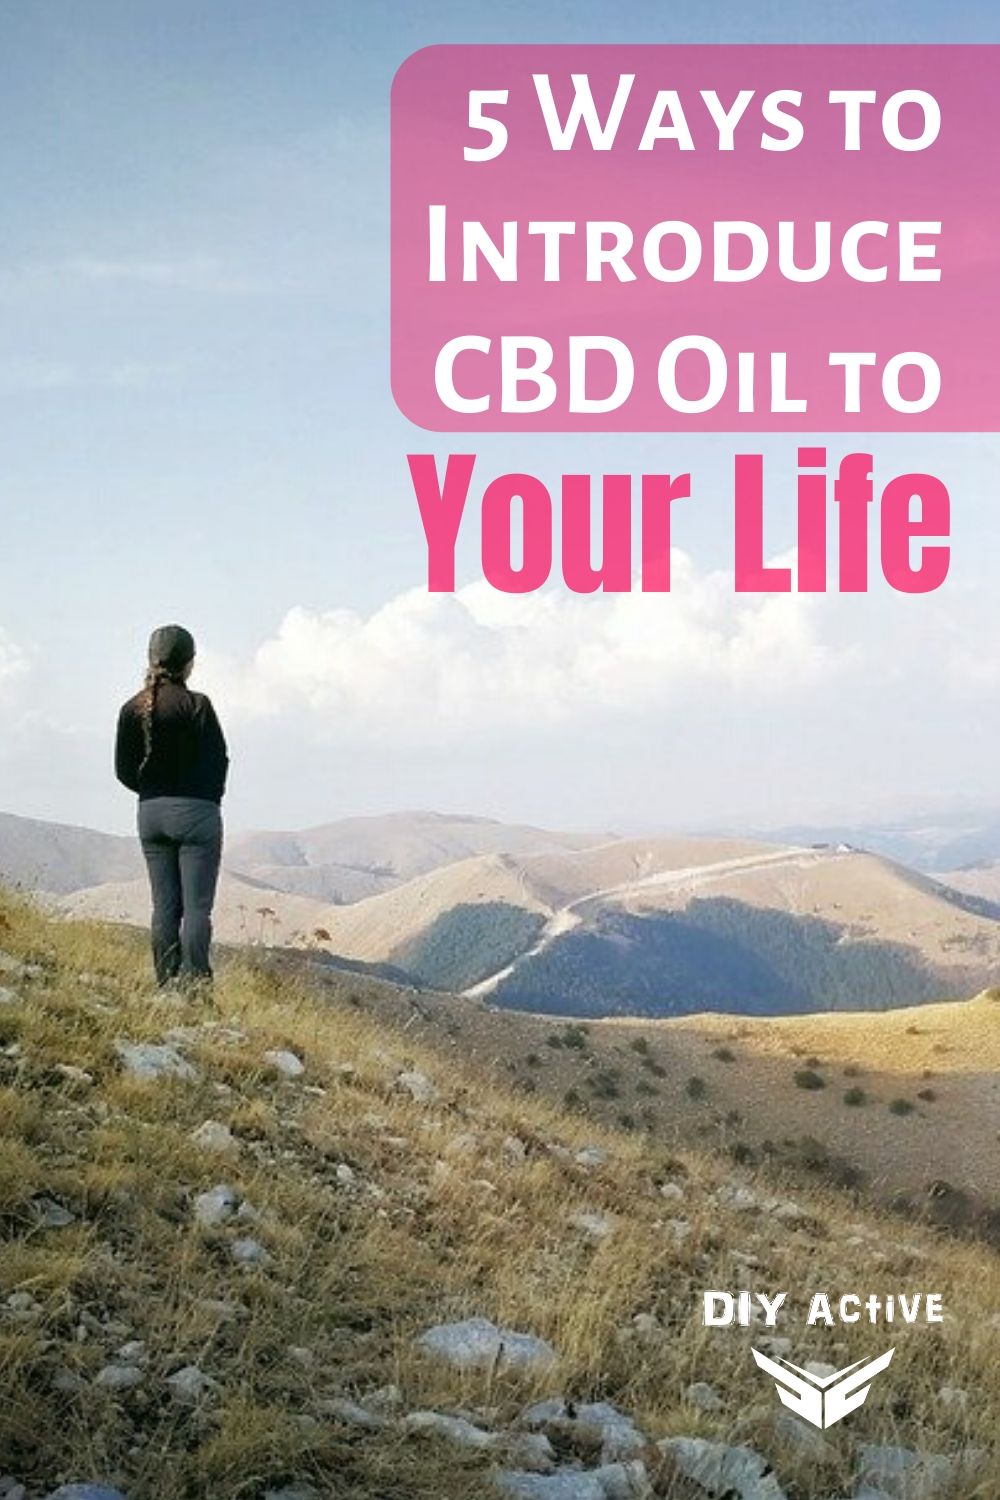 5 Ways to Introduce CBD Oil to Your Life